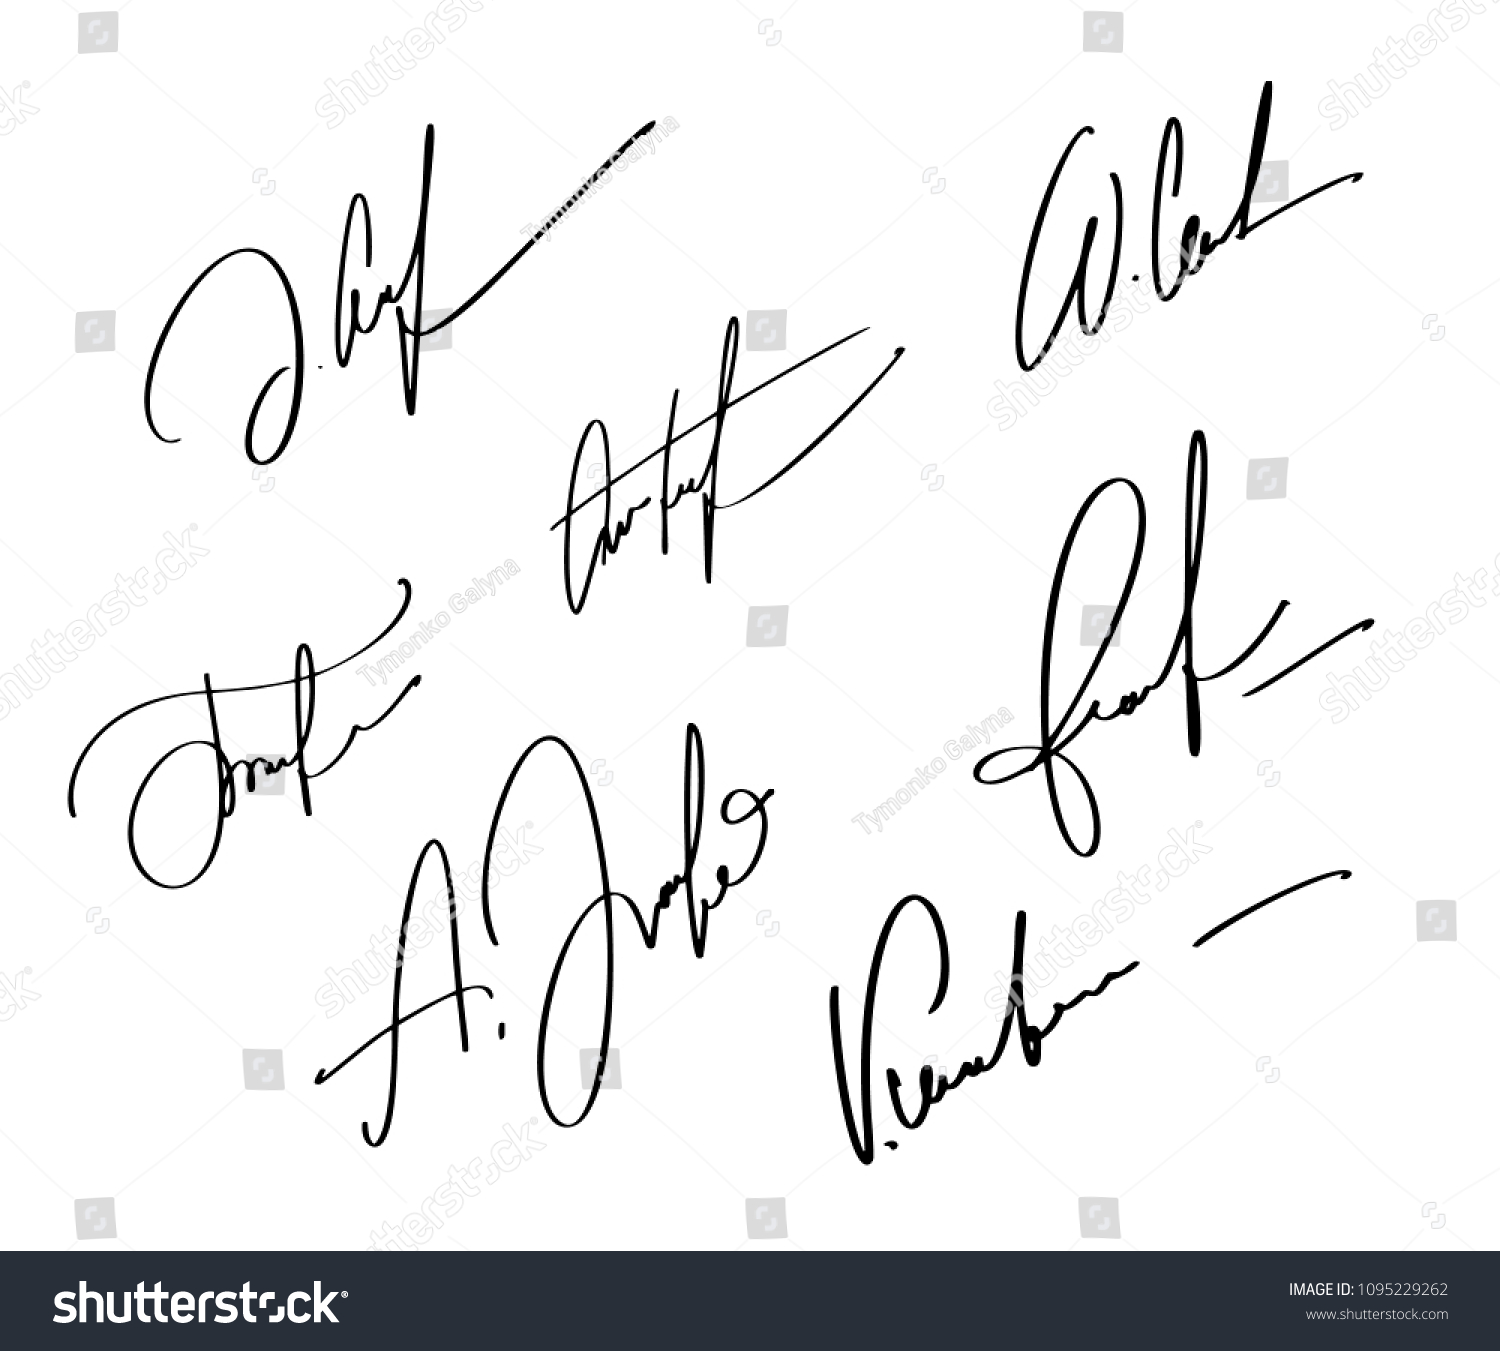 Manual signature for documents on white background. Hand drawn Calligraphy lettering Vector illustration EPS10 #1095229262